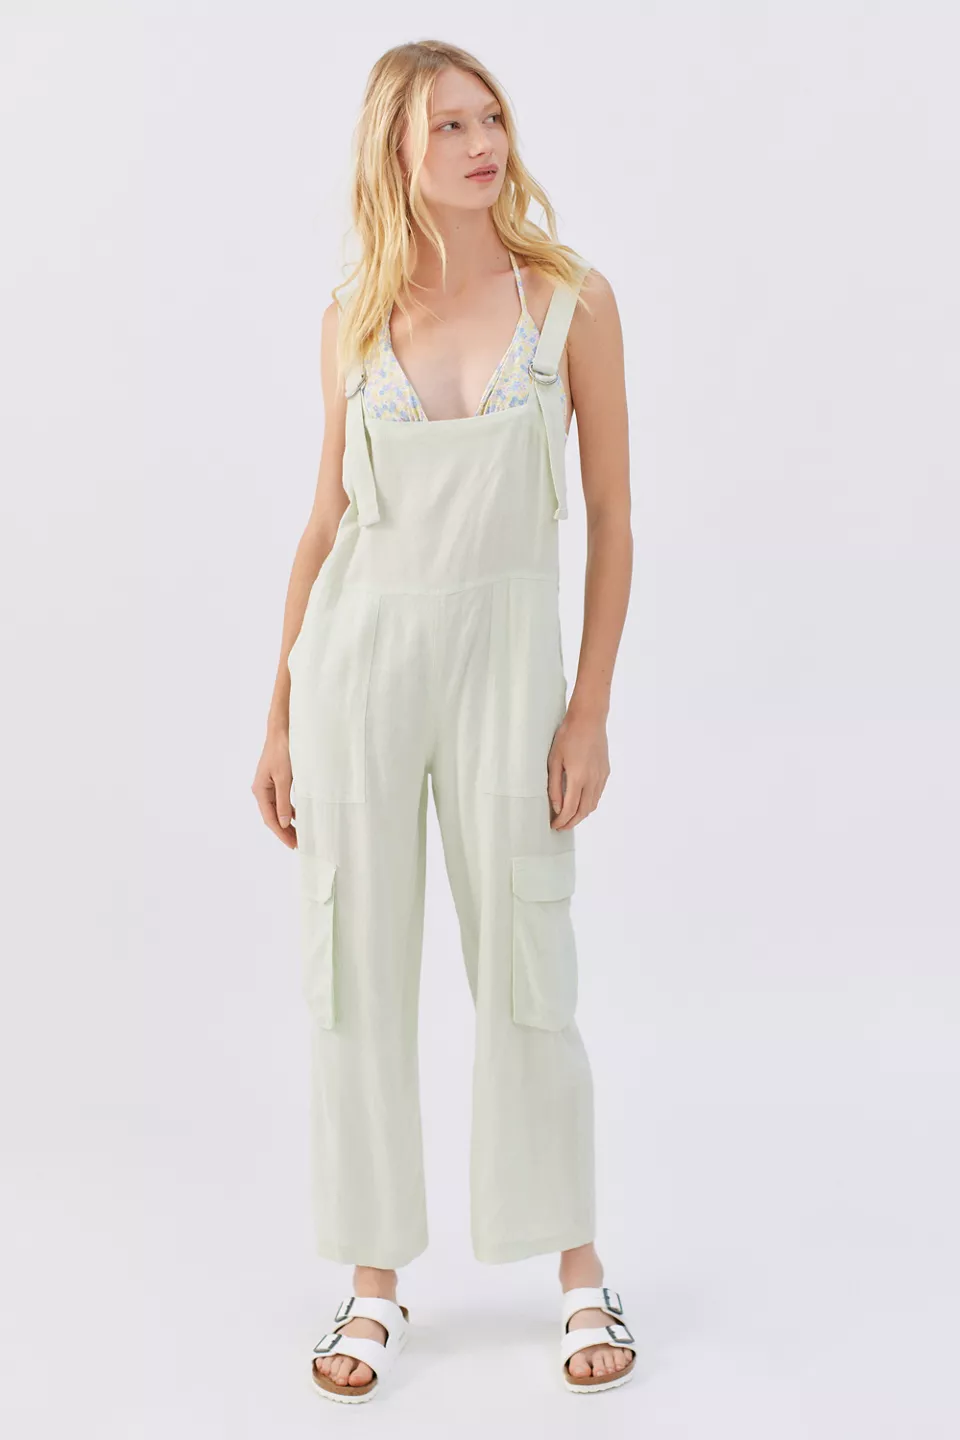 urbanoutfitters.com | BDG Tilly Linen Utility Overall